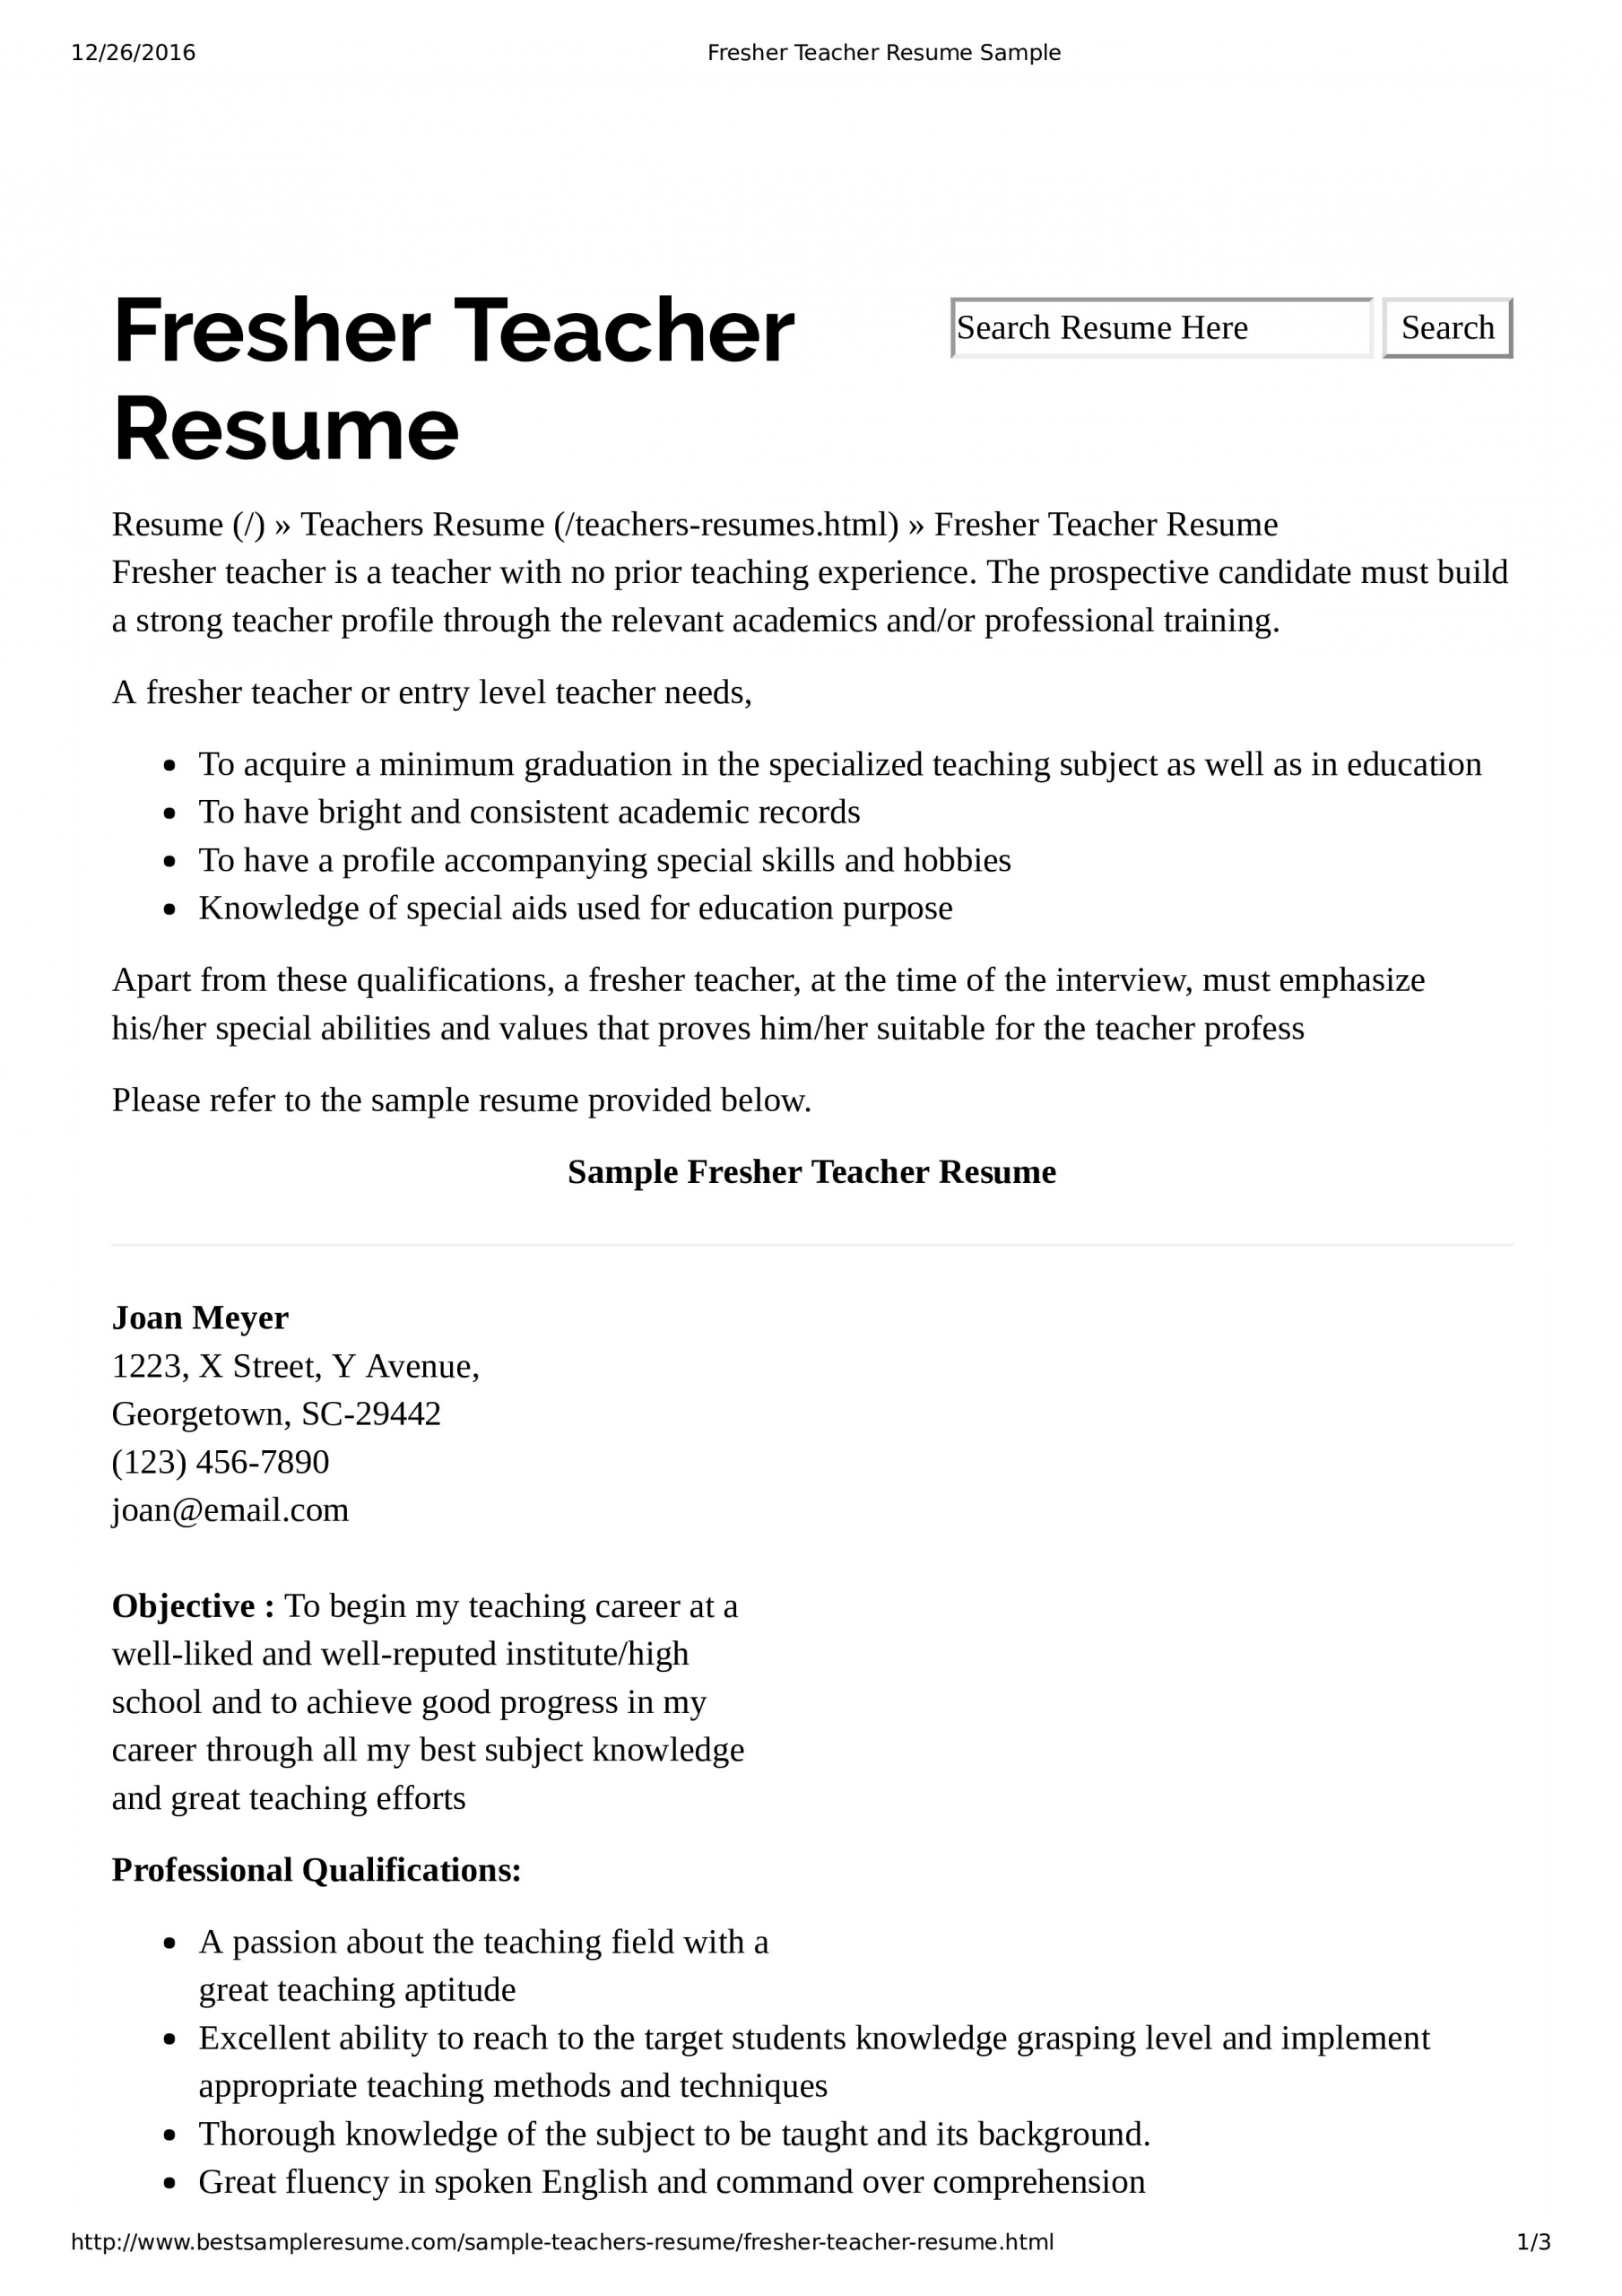 Sample Resume for Teaching Position with No Experience Preschool Teacher Resume with No Experience